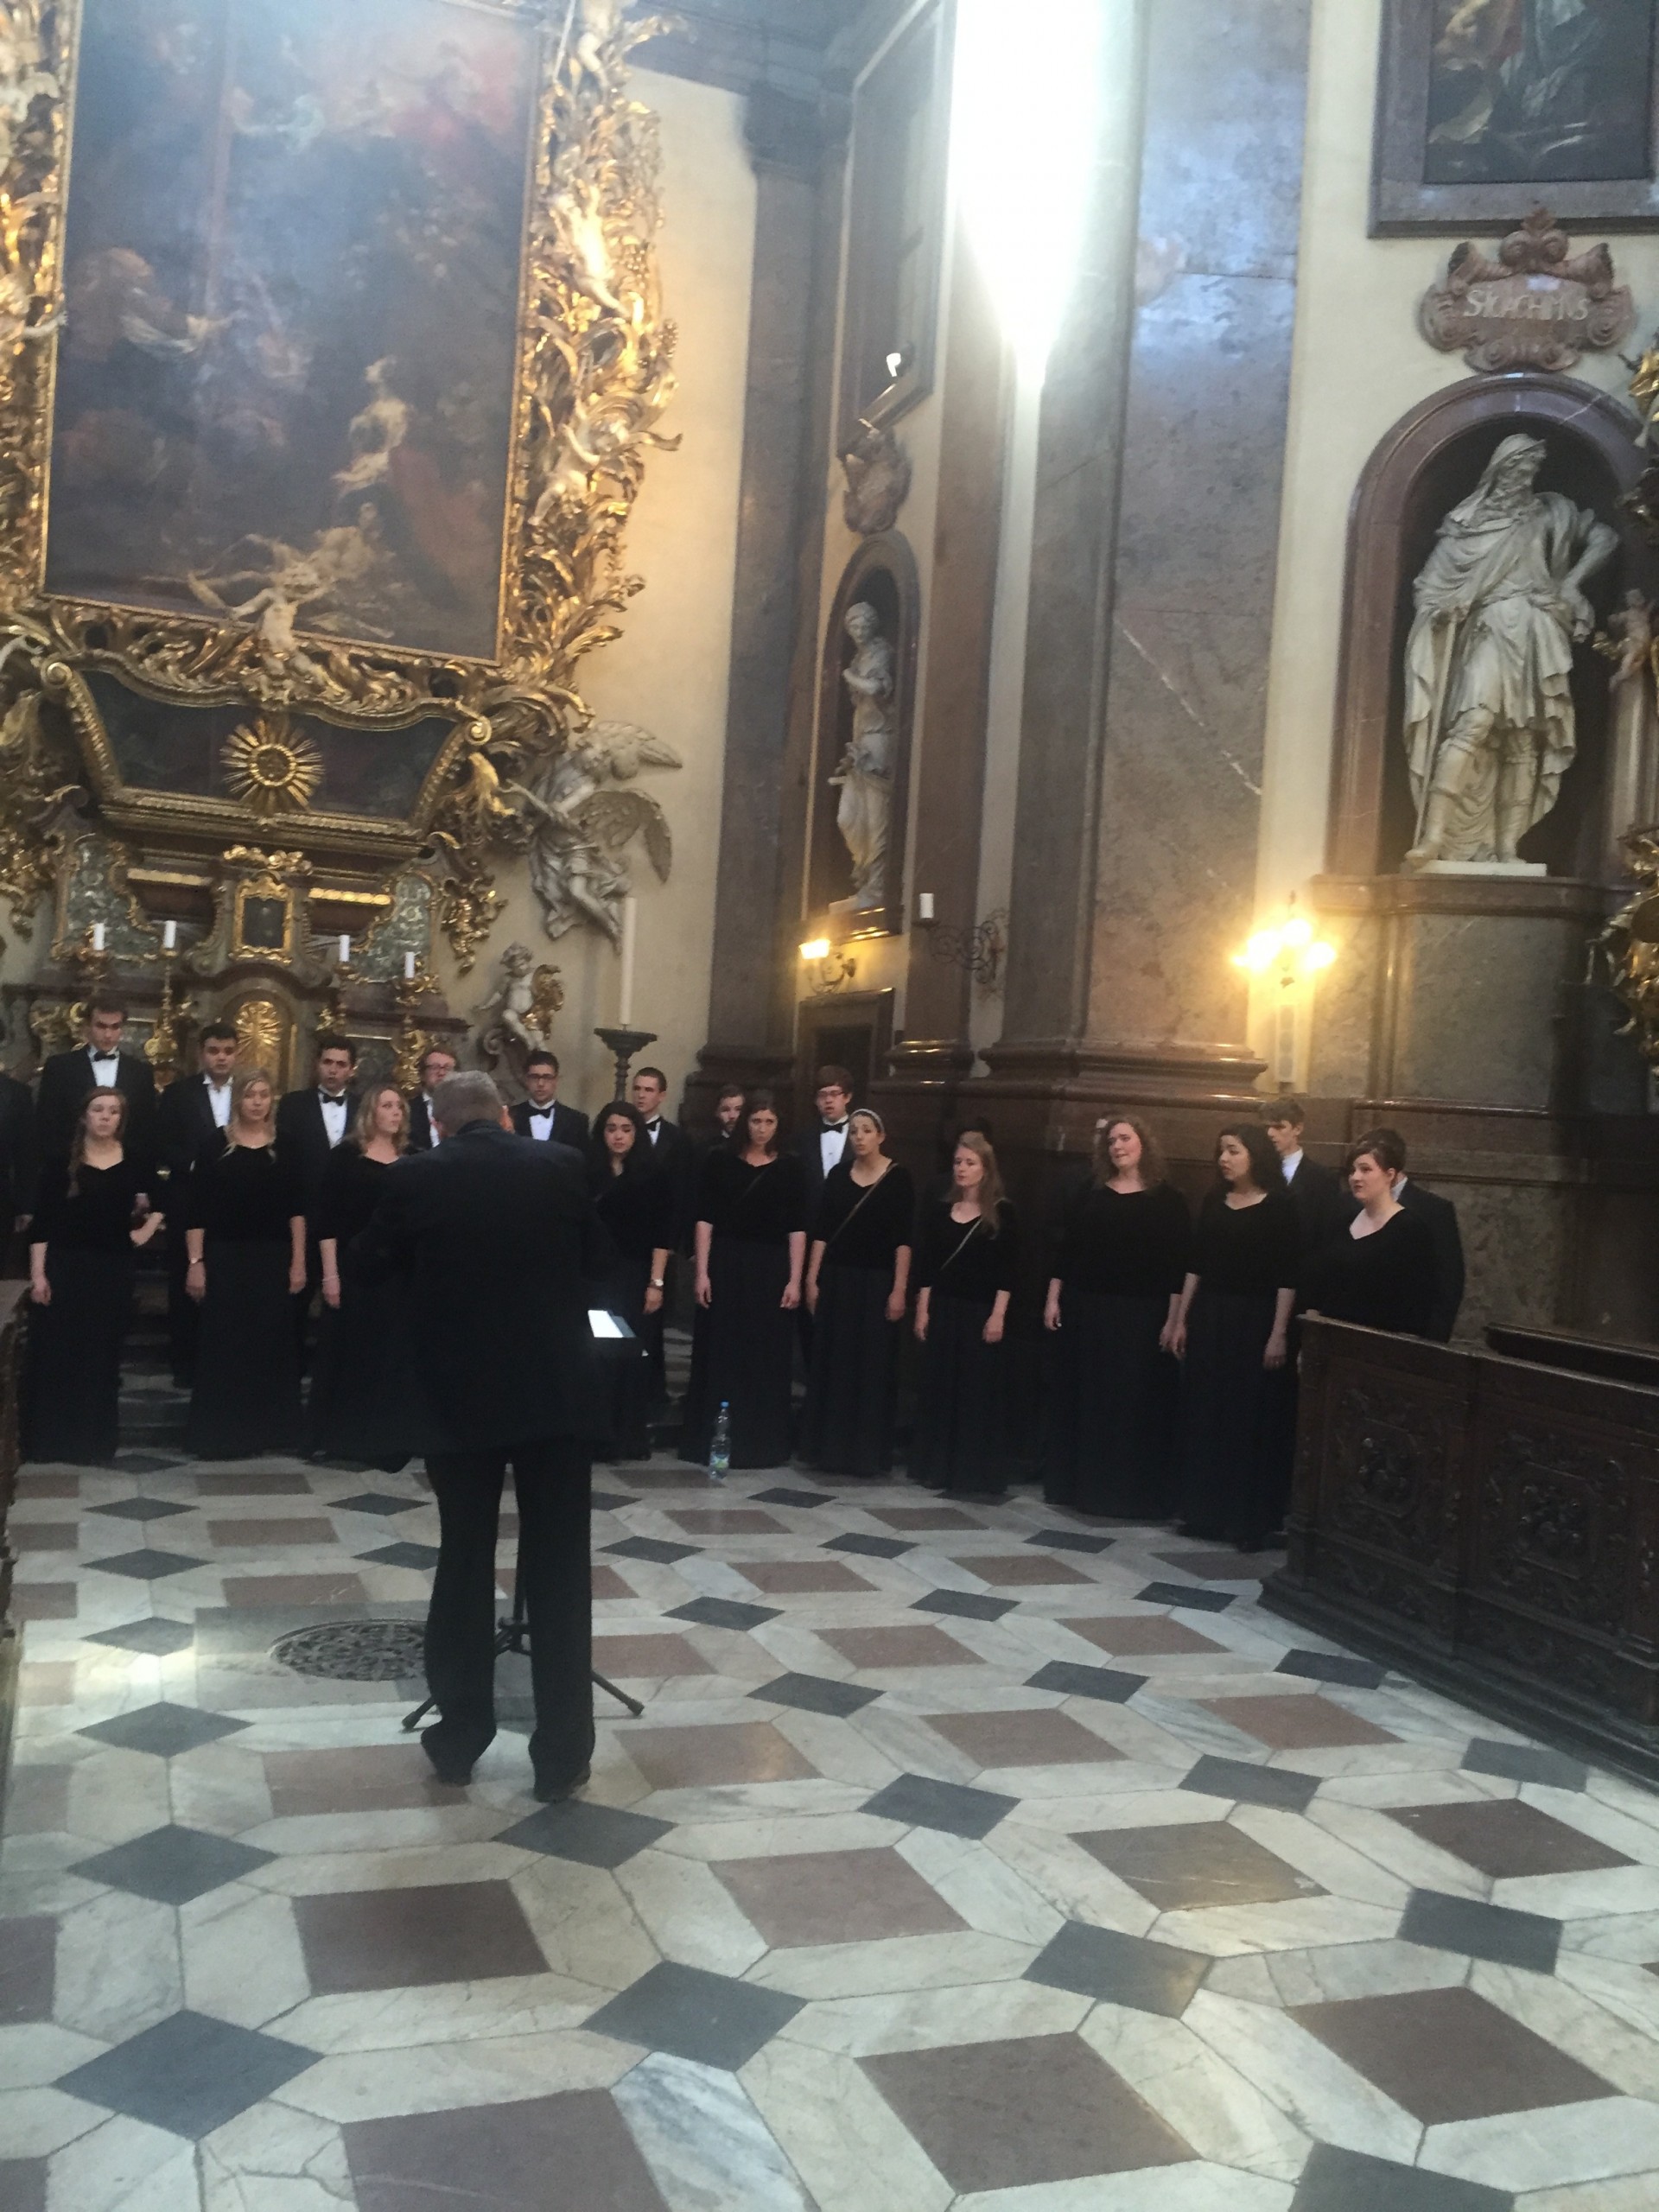 The Choir sang in churches and venues in Stockholm, Copenhagen, Prague and the Brucknerhaus in Linz. They sang in Martin Luther’s home church in Wittenberg, Germany, as well as the Thomaskirche in Leipzig, where J.S. Bach worked for 37 years.